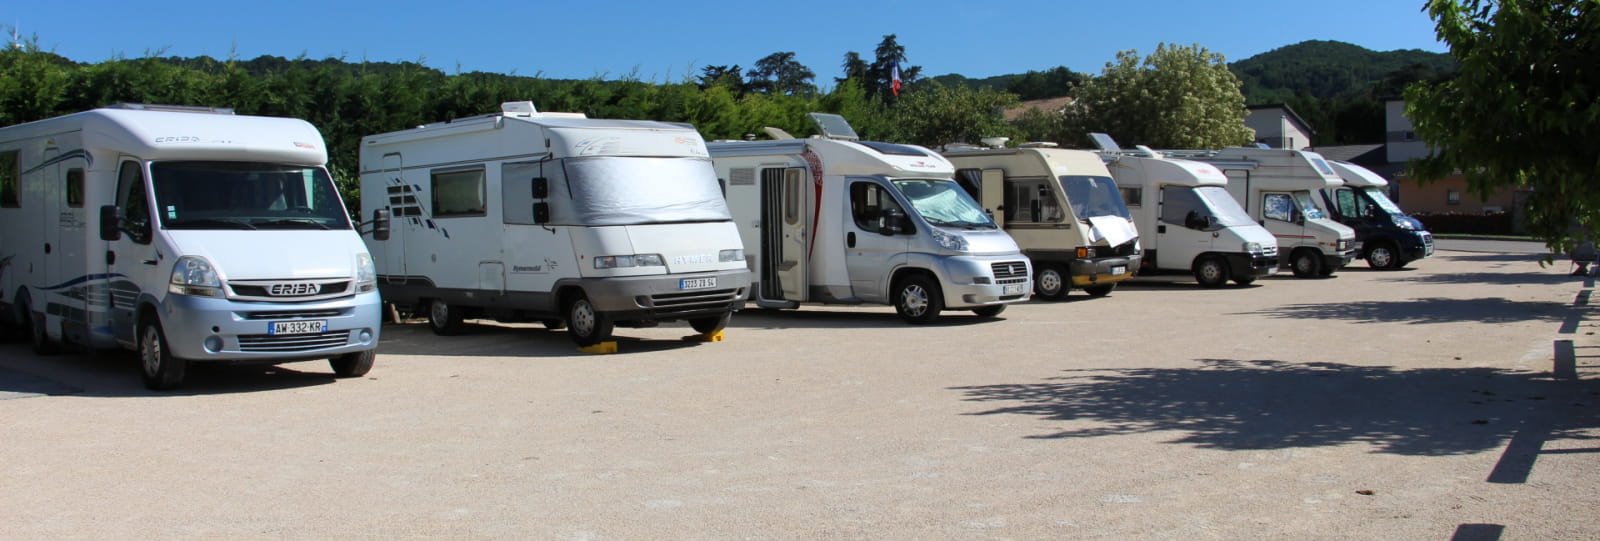 Aire Camping-Cars de Beausemblant